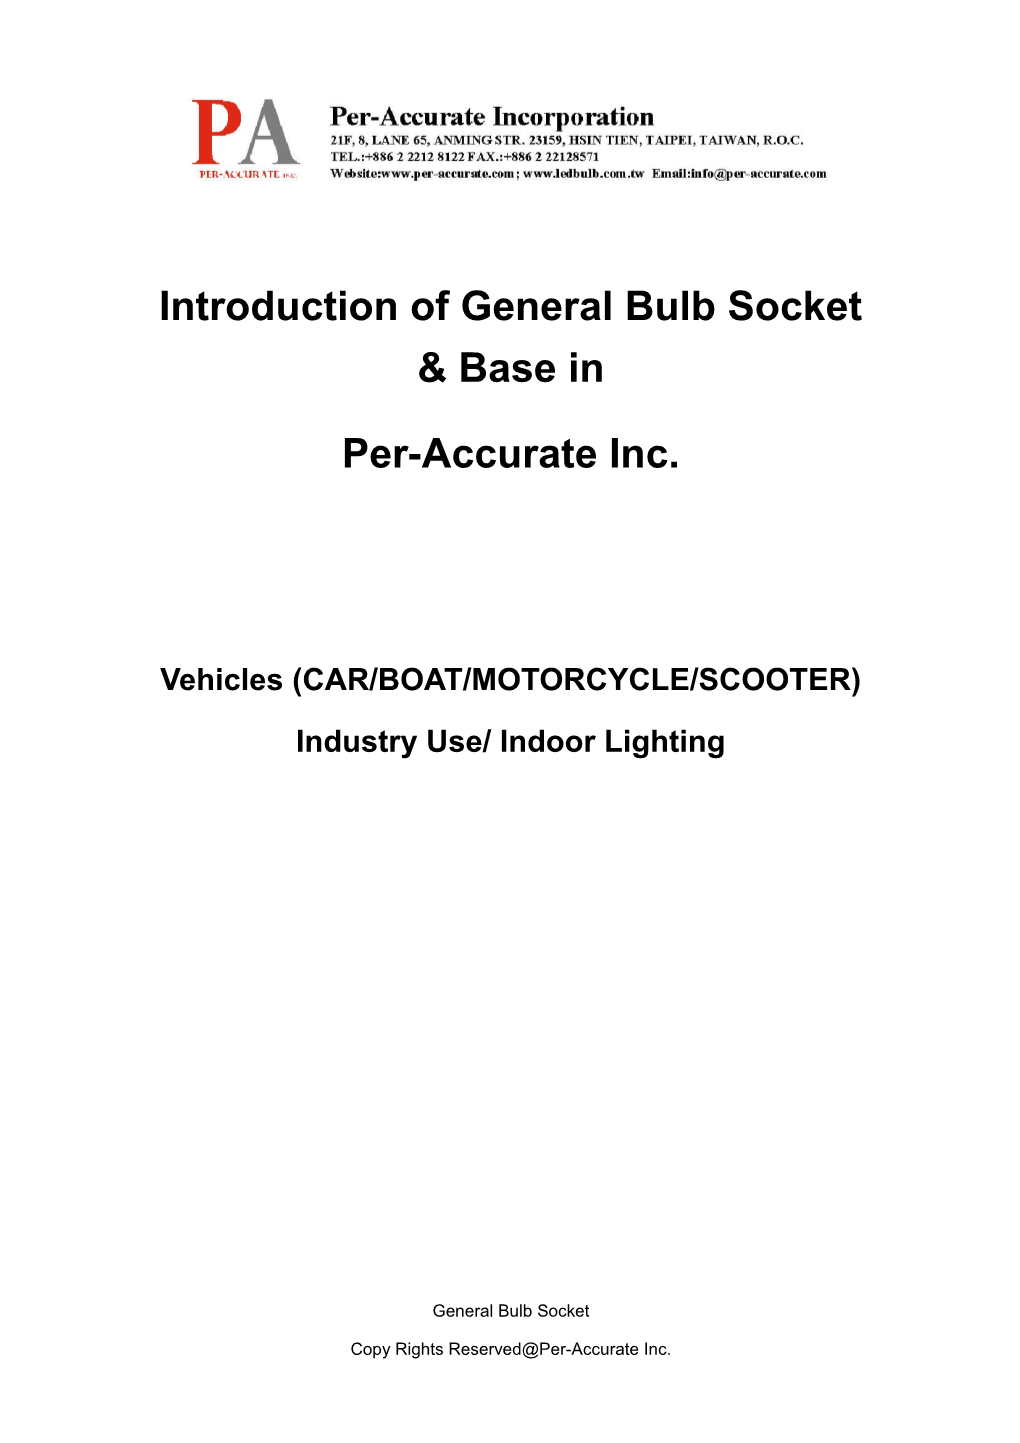 Basic Bulb Socket/Base General Used in Automobile Industry